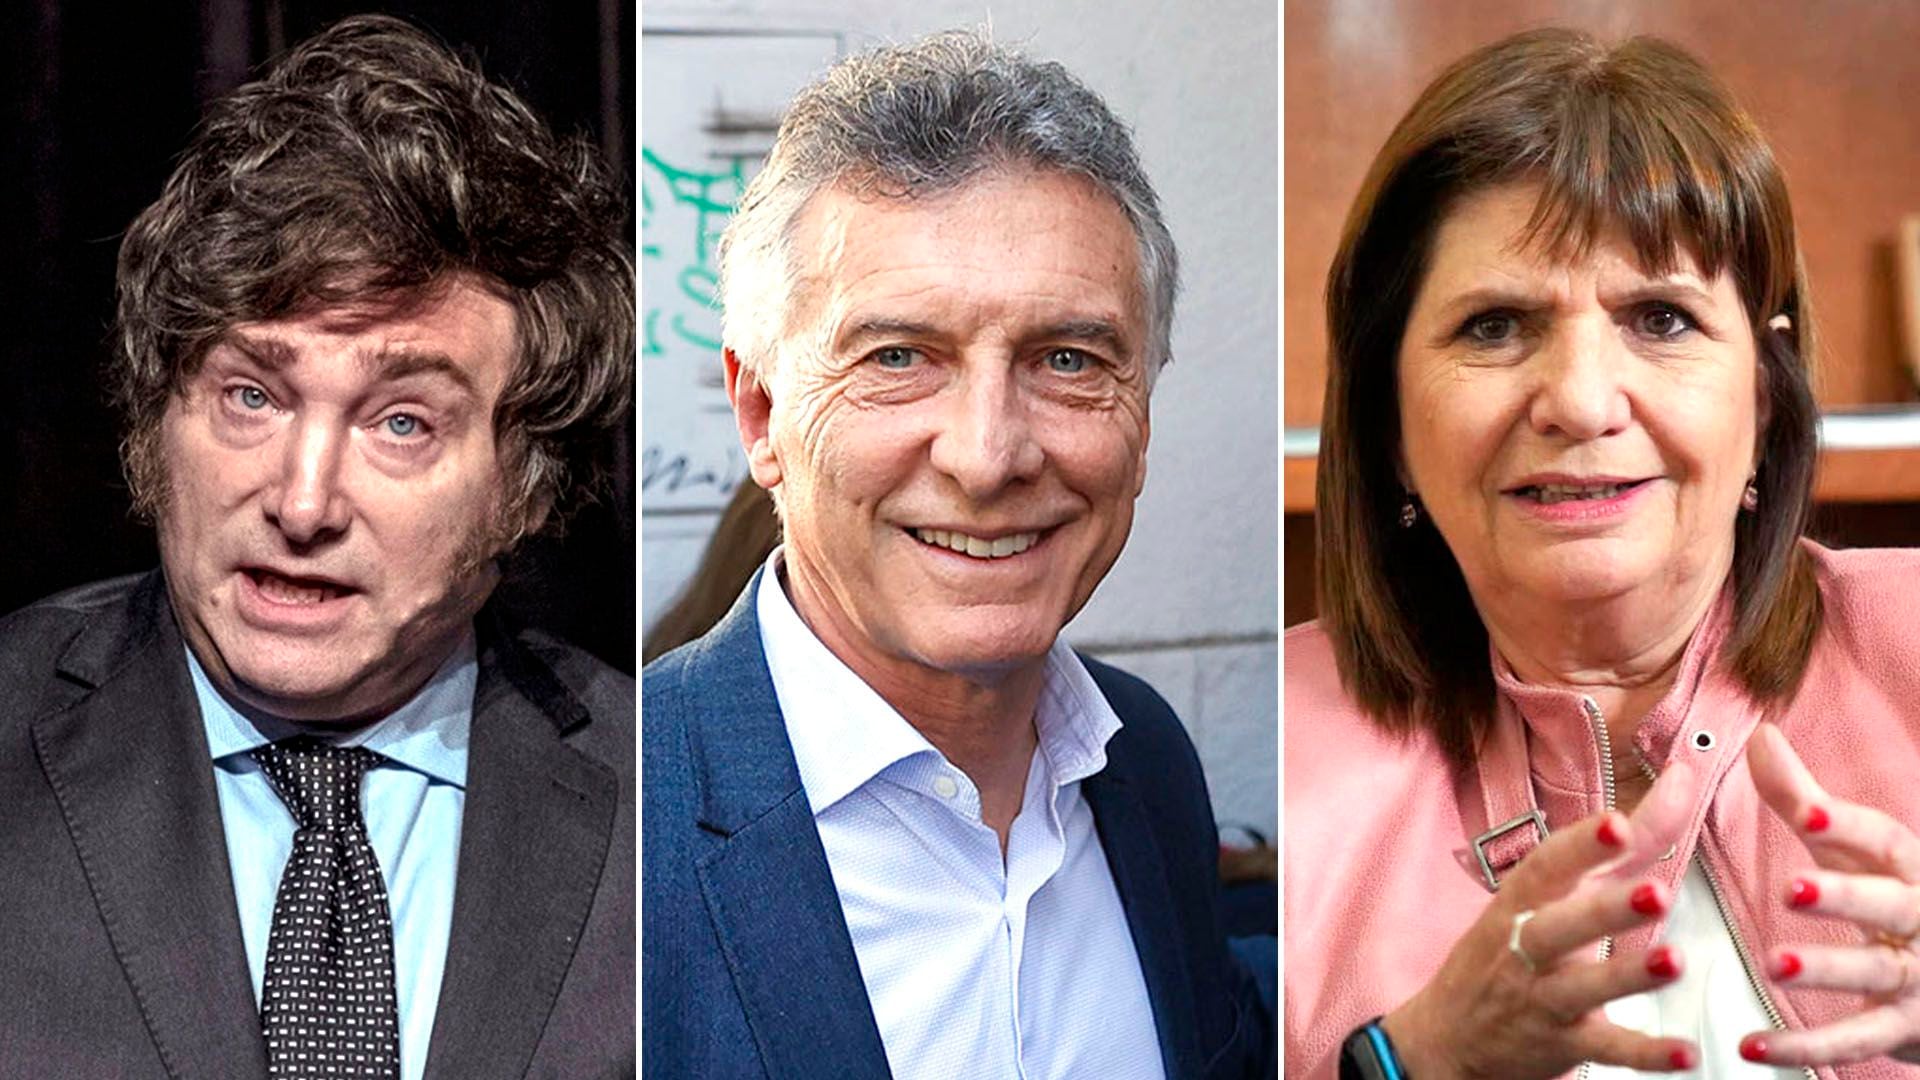 Javier Milei, Mauricio Macri and Patricia Bullrich, axes of a bold political agreement that fractures Together for Change